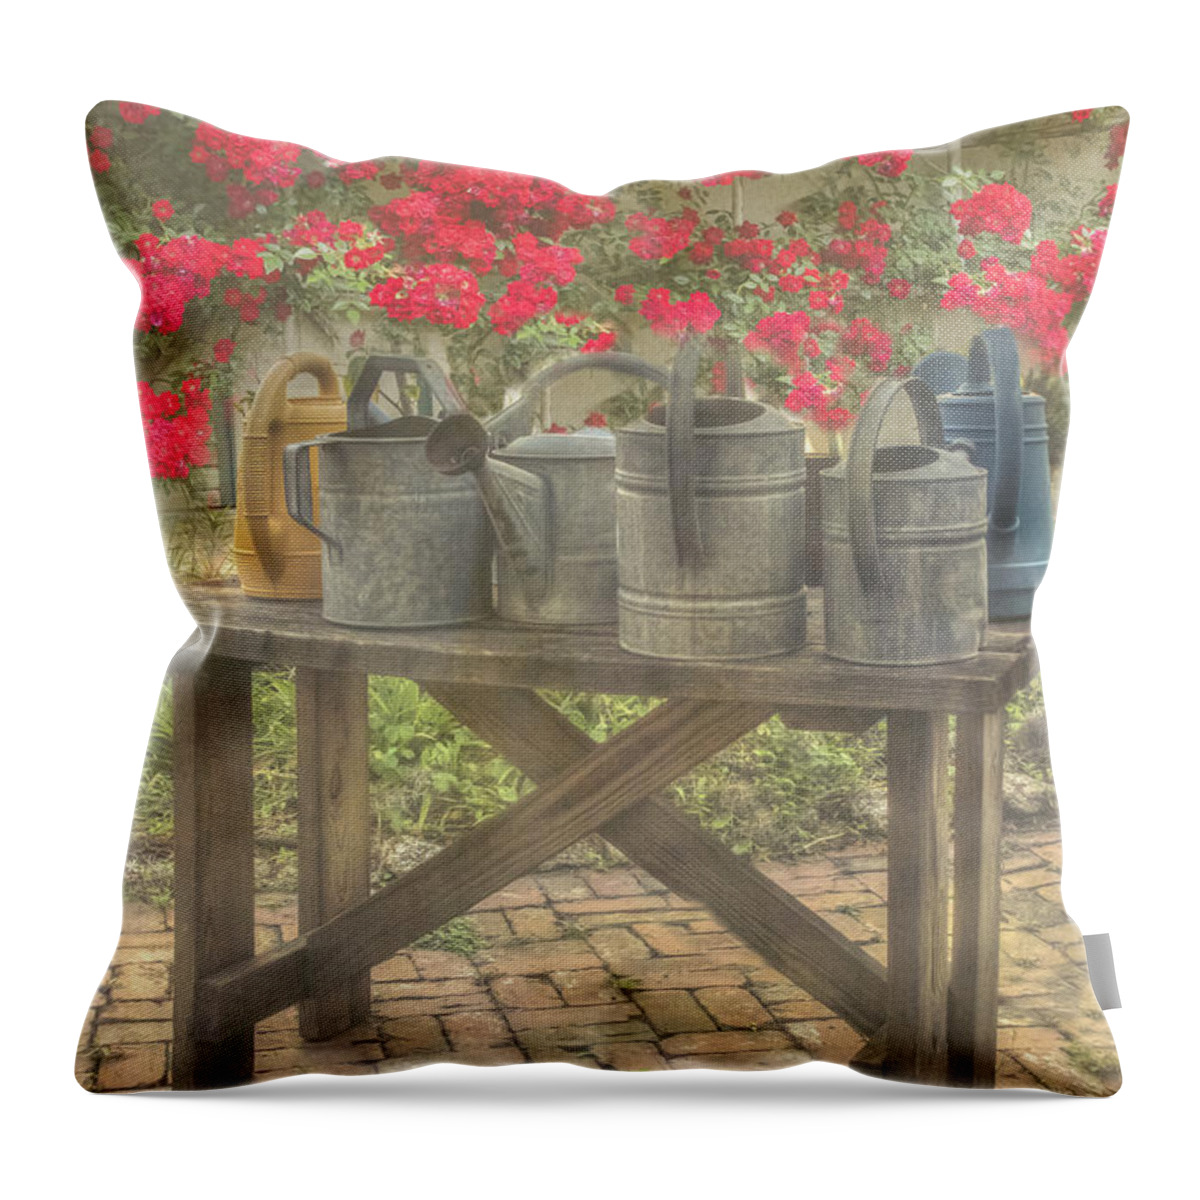  Watering Cans Throw Pillow featuring the photograph Garden Treasures by Marilyn Cornwell